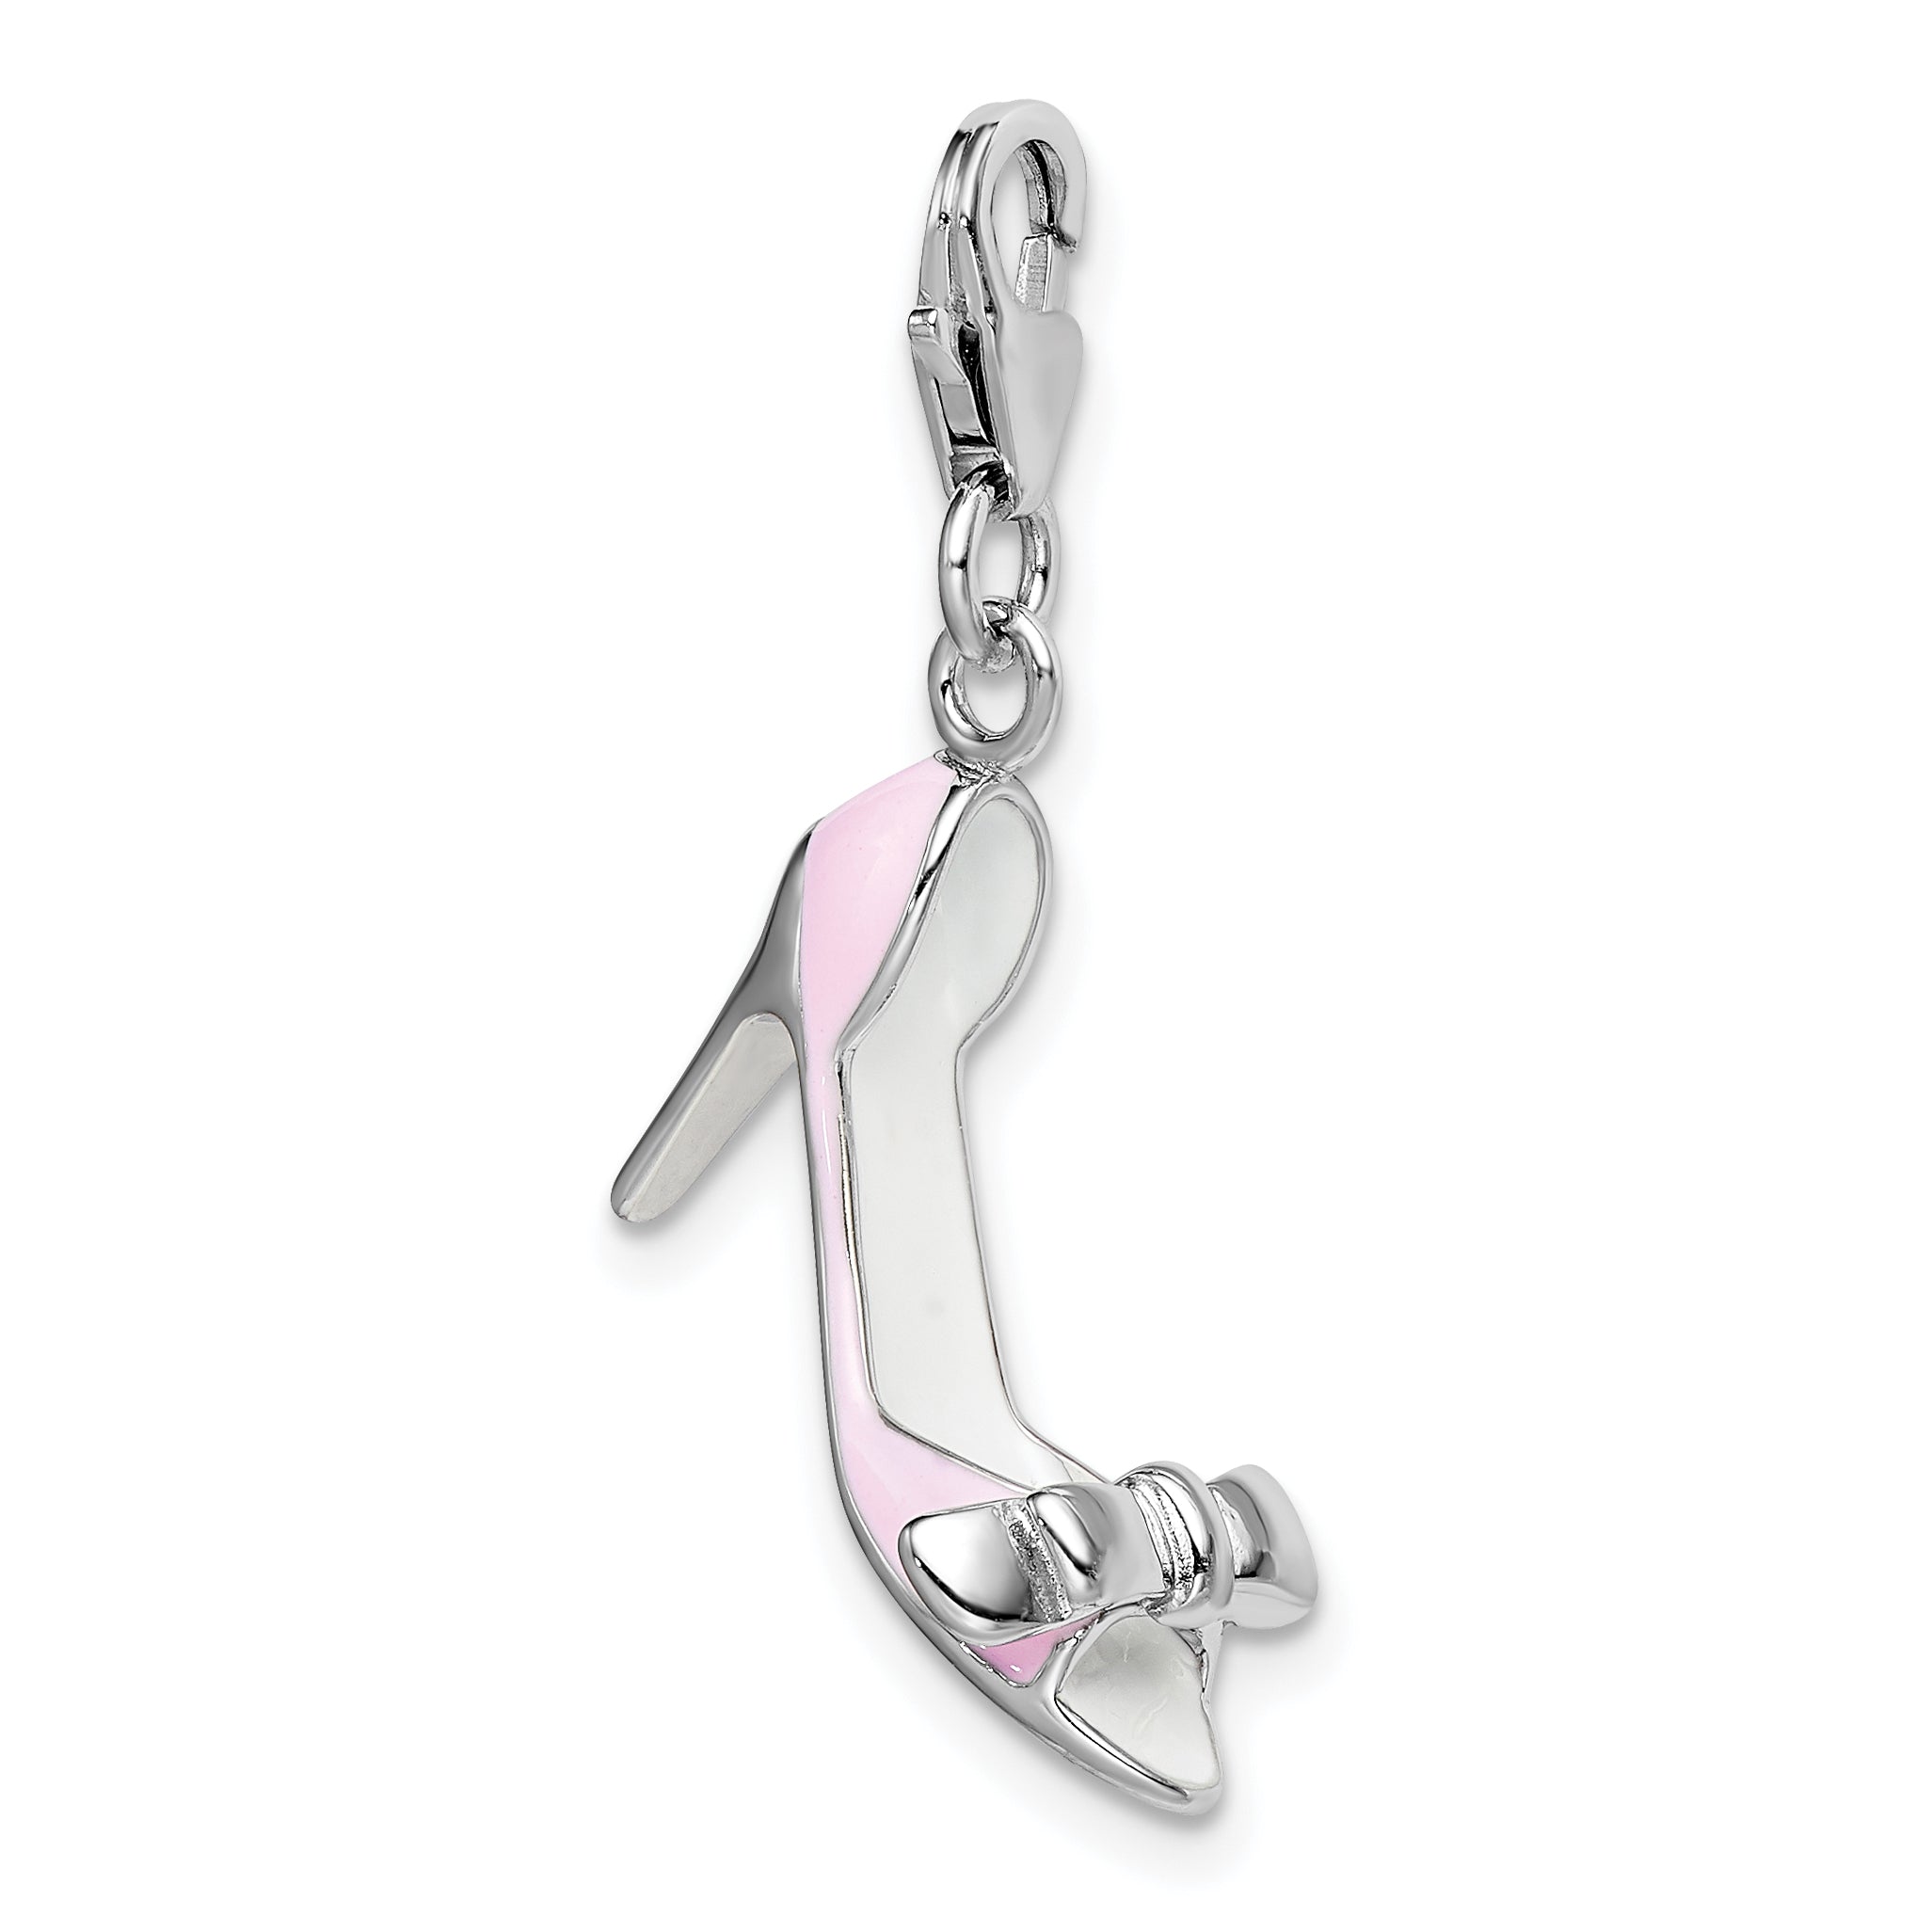 Amore La Vita Sterling Silver Rhodium-plated Polished 3-D Pink Enameled Bow-top High Heel Charm with Fancy Lobster Clasp